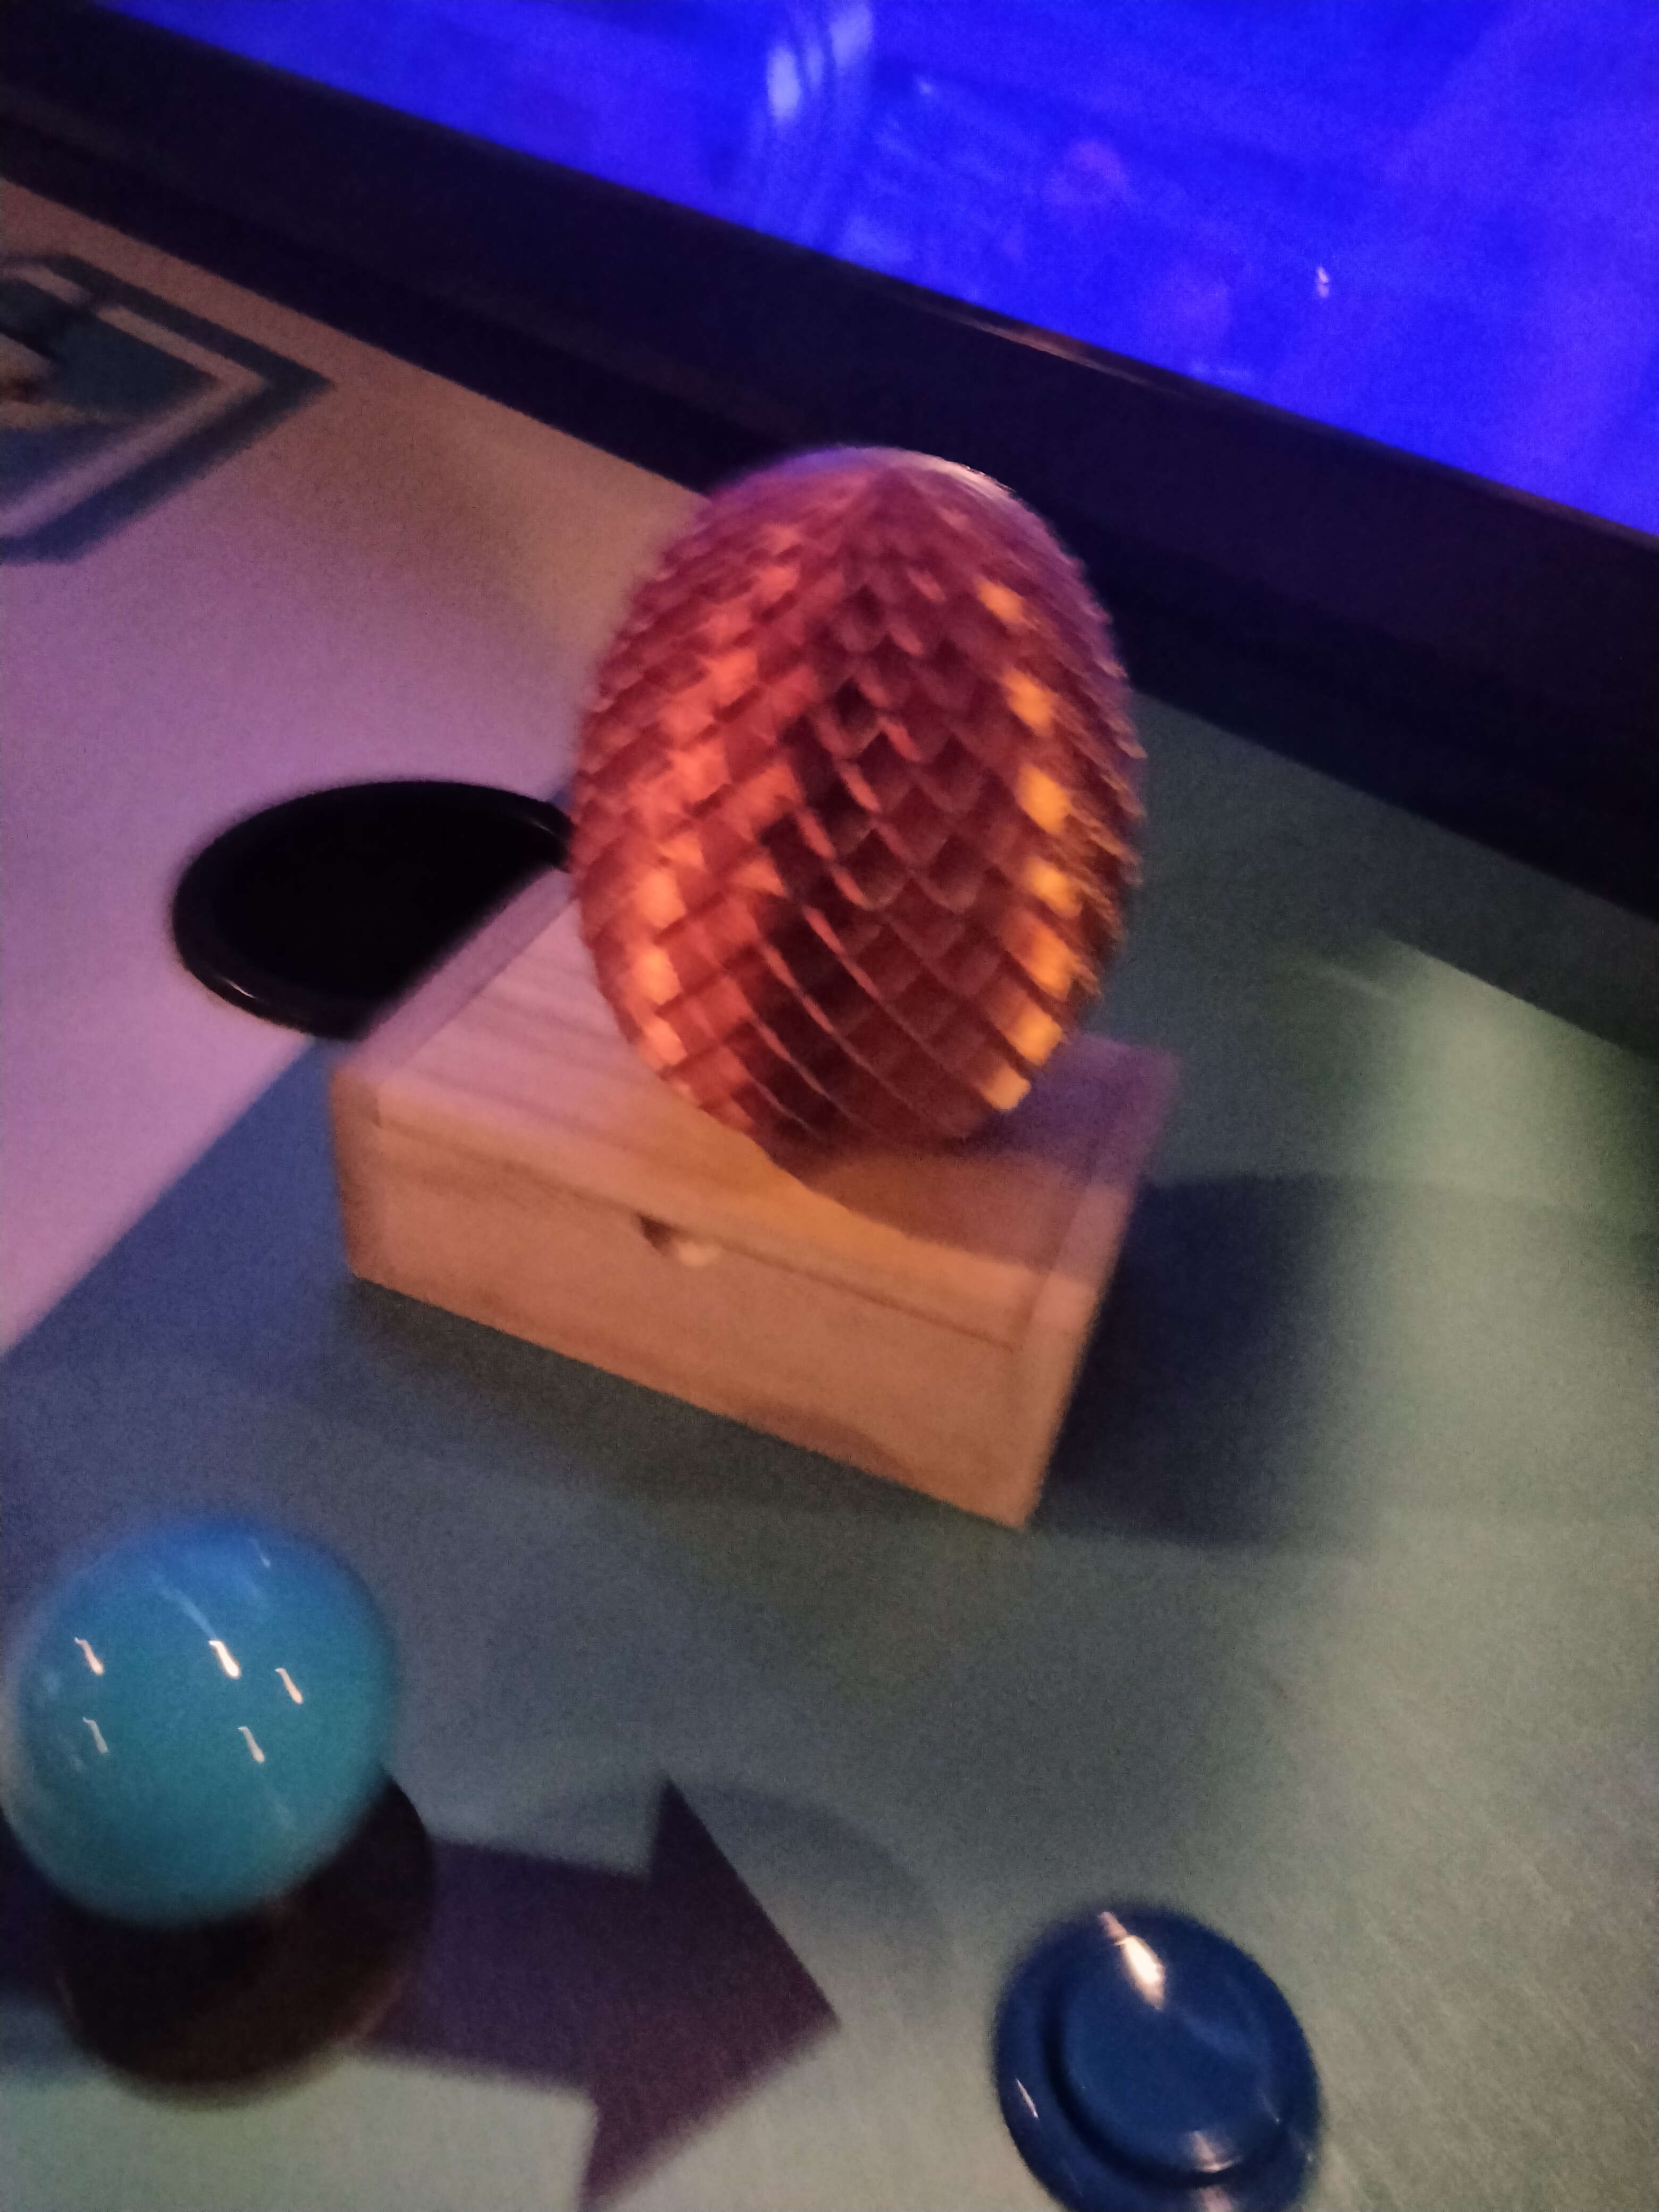 A pineapple-like object with an unscrewable top, placed atop a small wooden box.